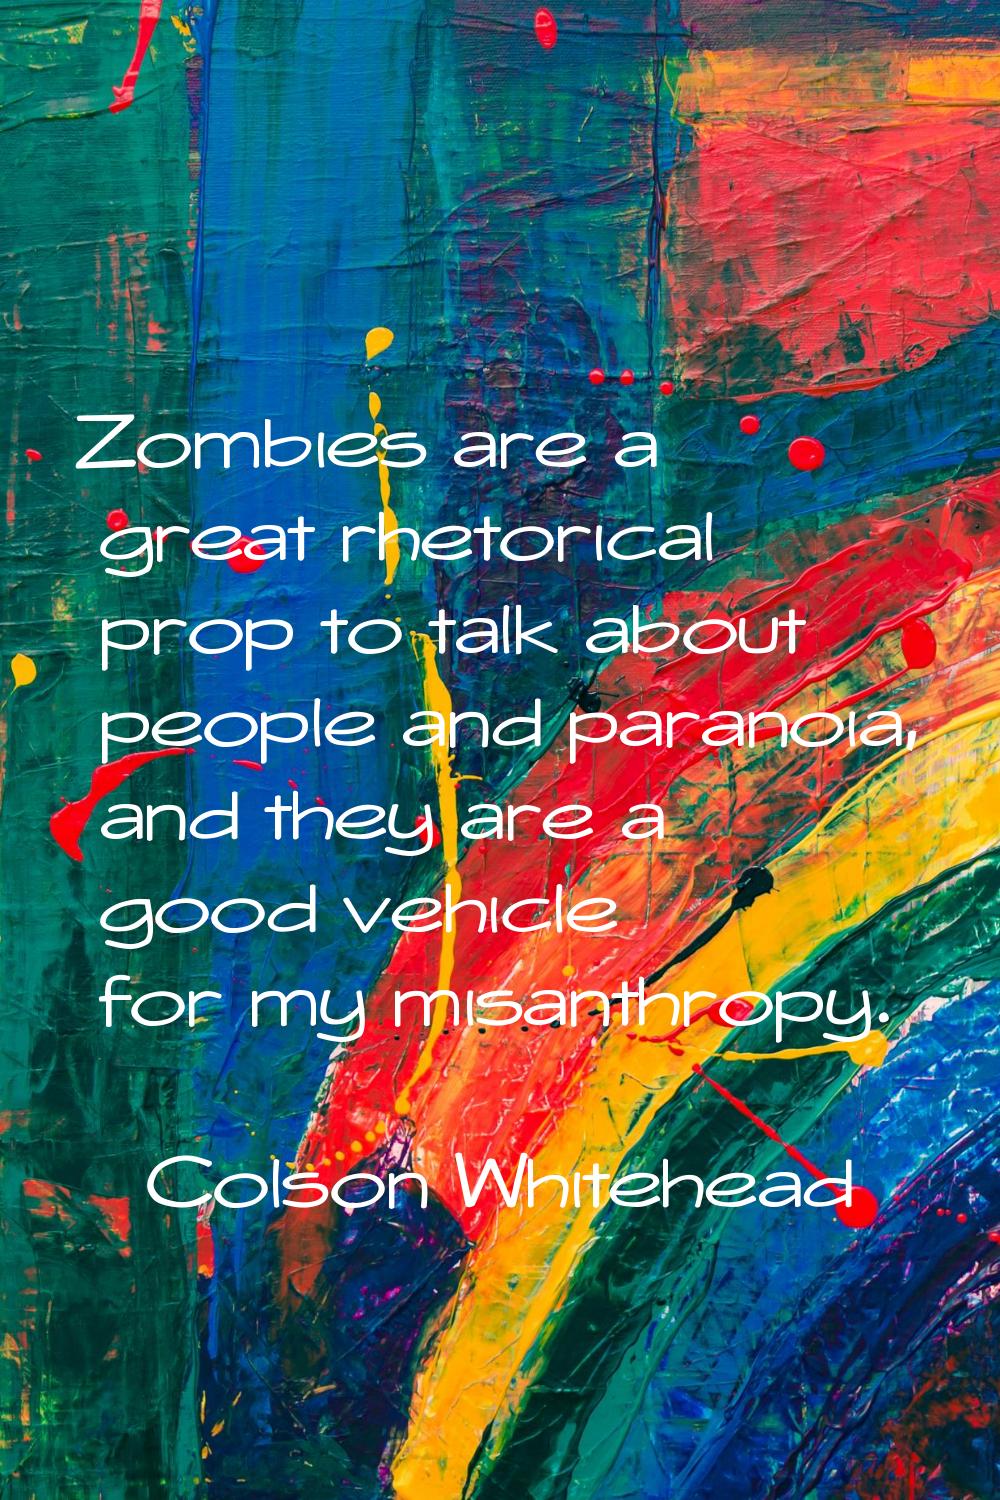 Zombies are a great rhetorical prop to talk about people and paranoia, and they are a good vehicle 